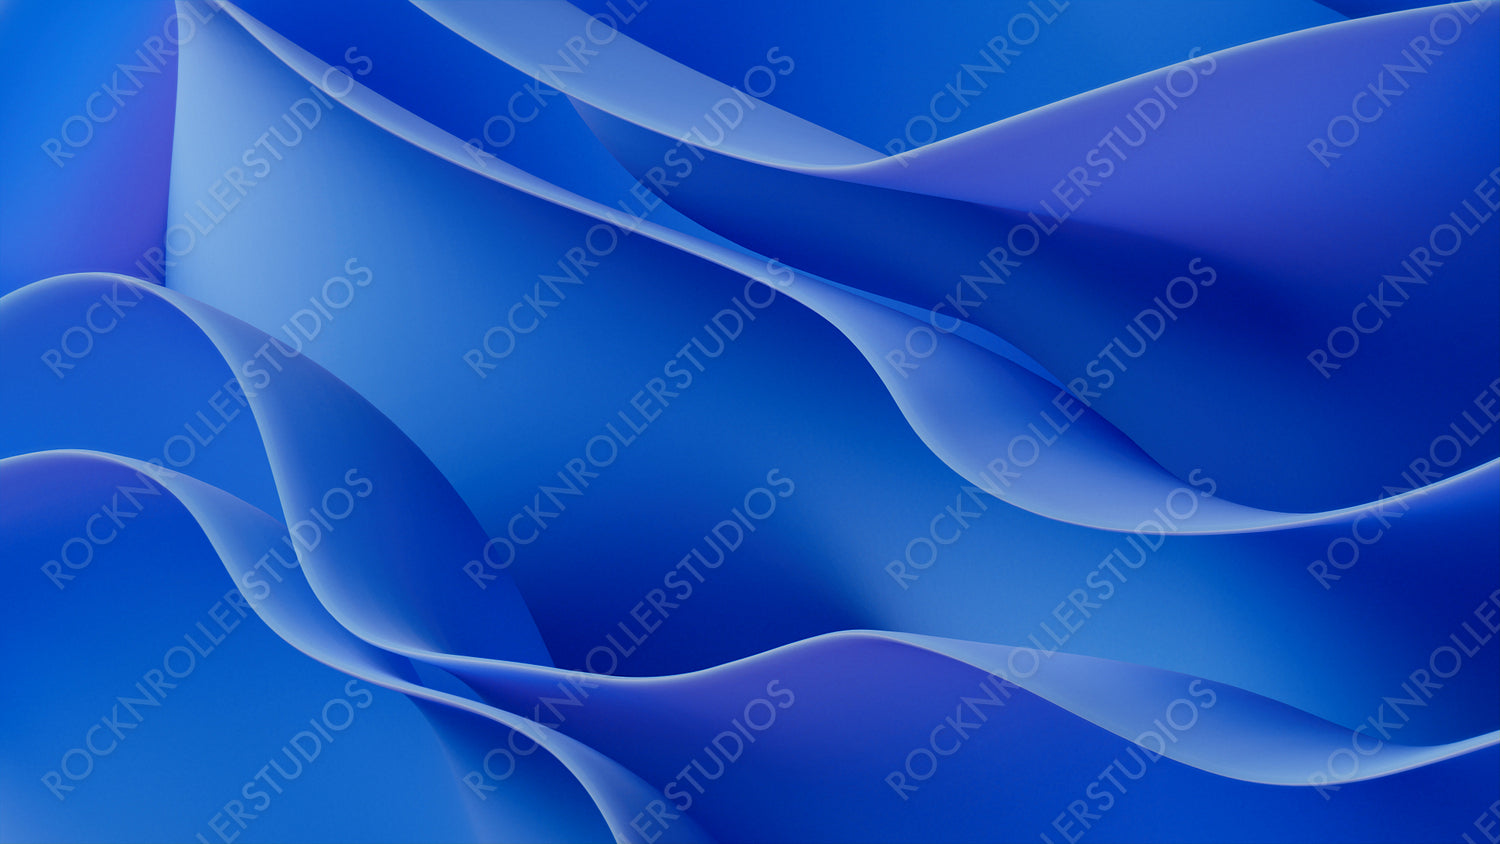 Blue Ripple Layers. Elegant Abstract 3D Background. 3D Render.